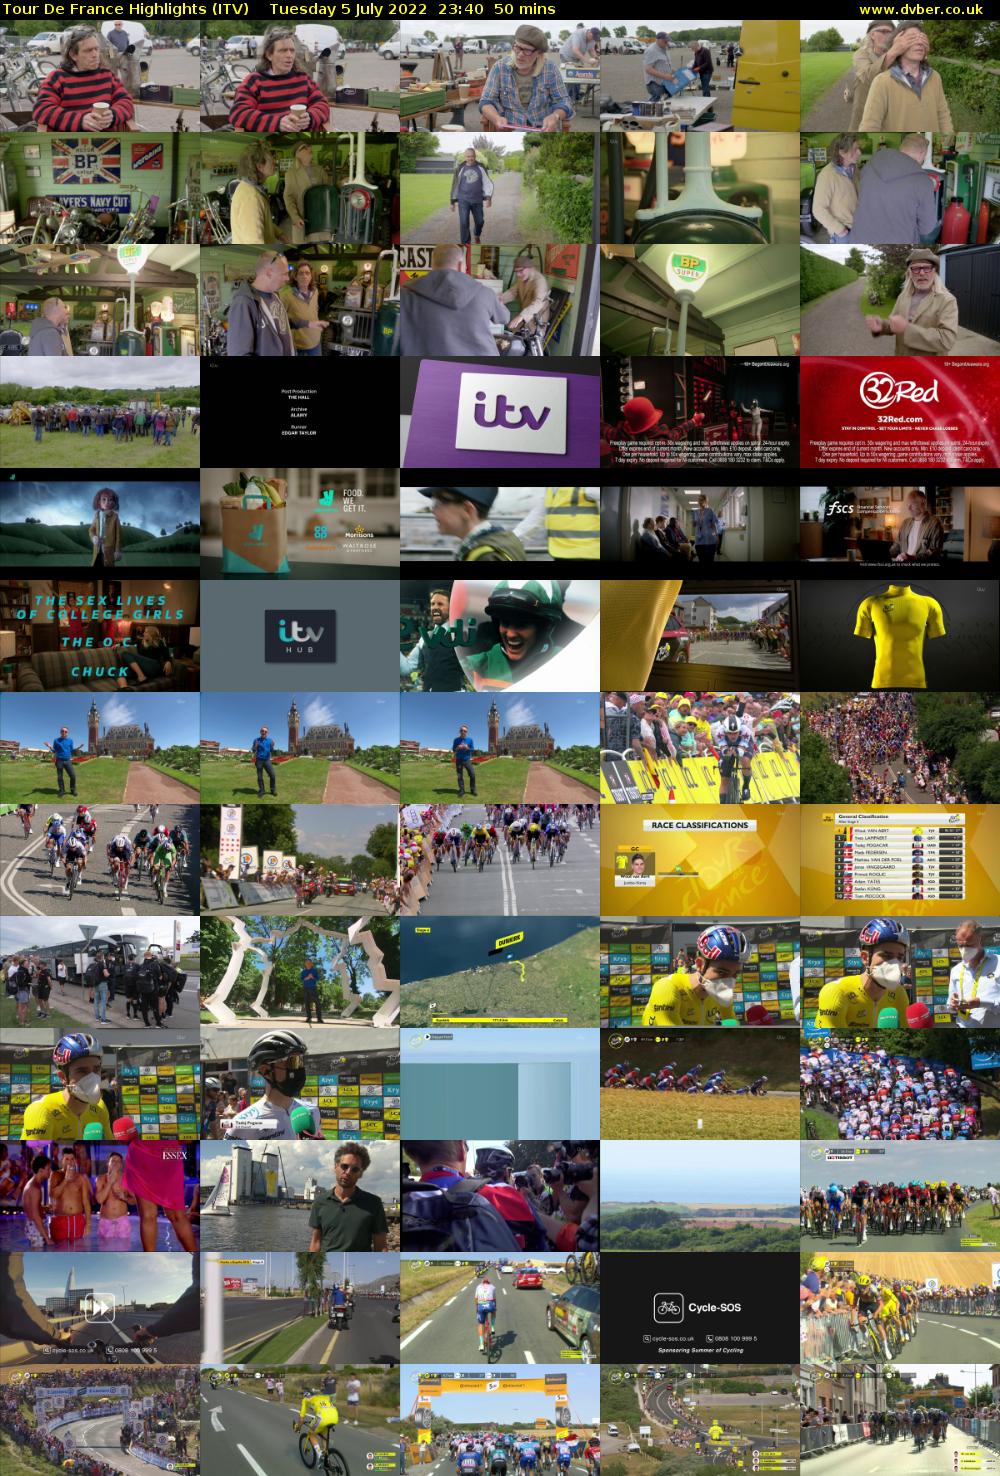 Tour De France Highlights (ITV) Tuesday 5 July 2022 23:40 - 00:30